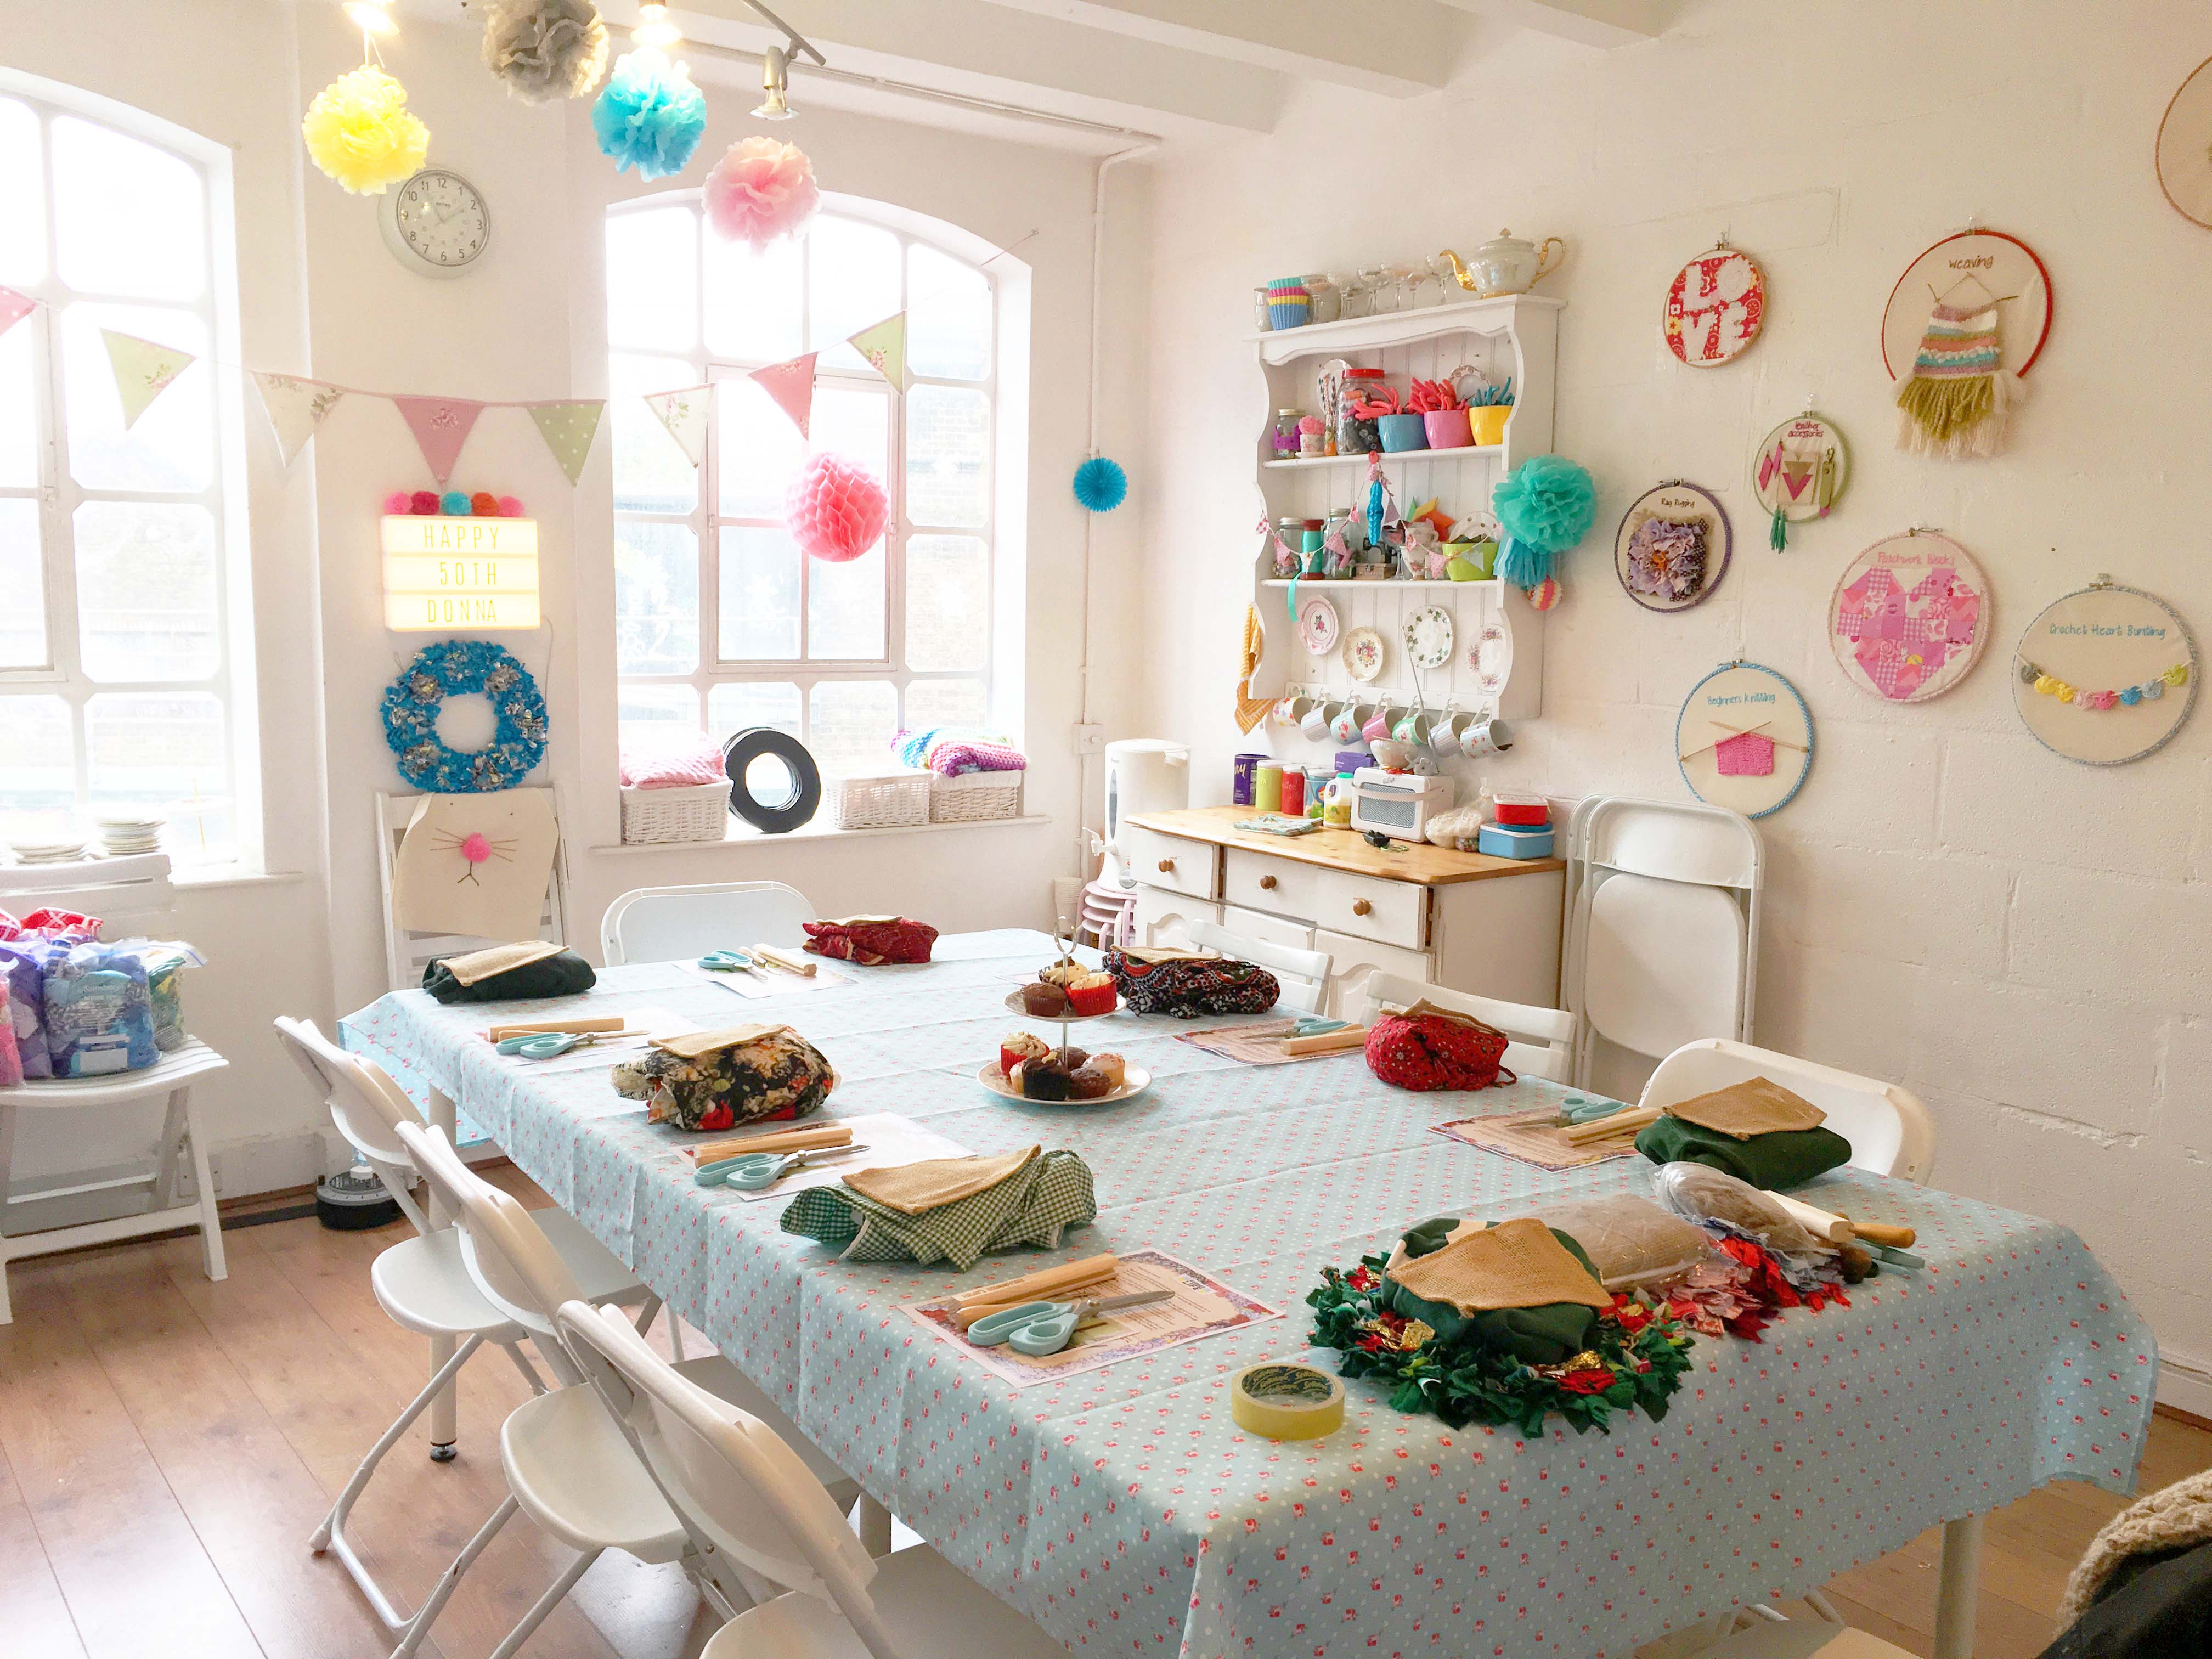 The Table set up before a rag rug workshop at Tea and Crafting in Camden